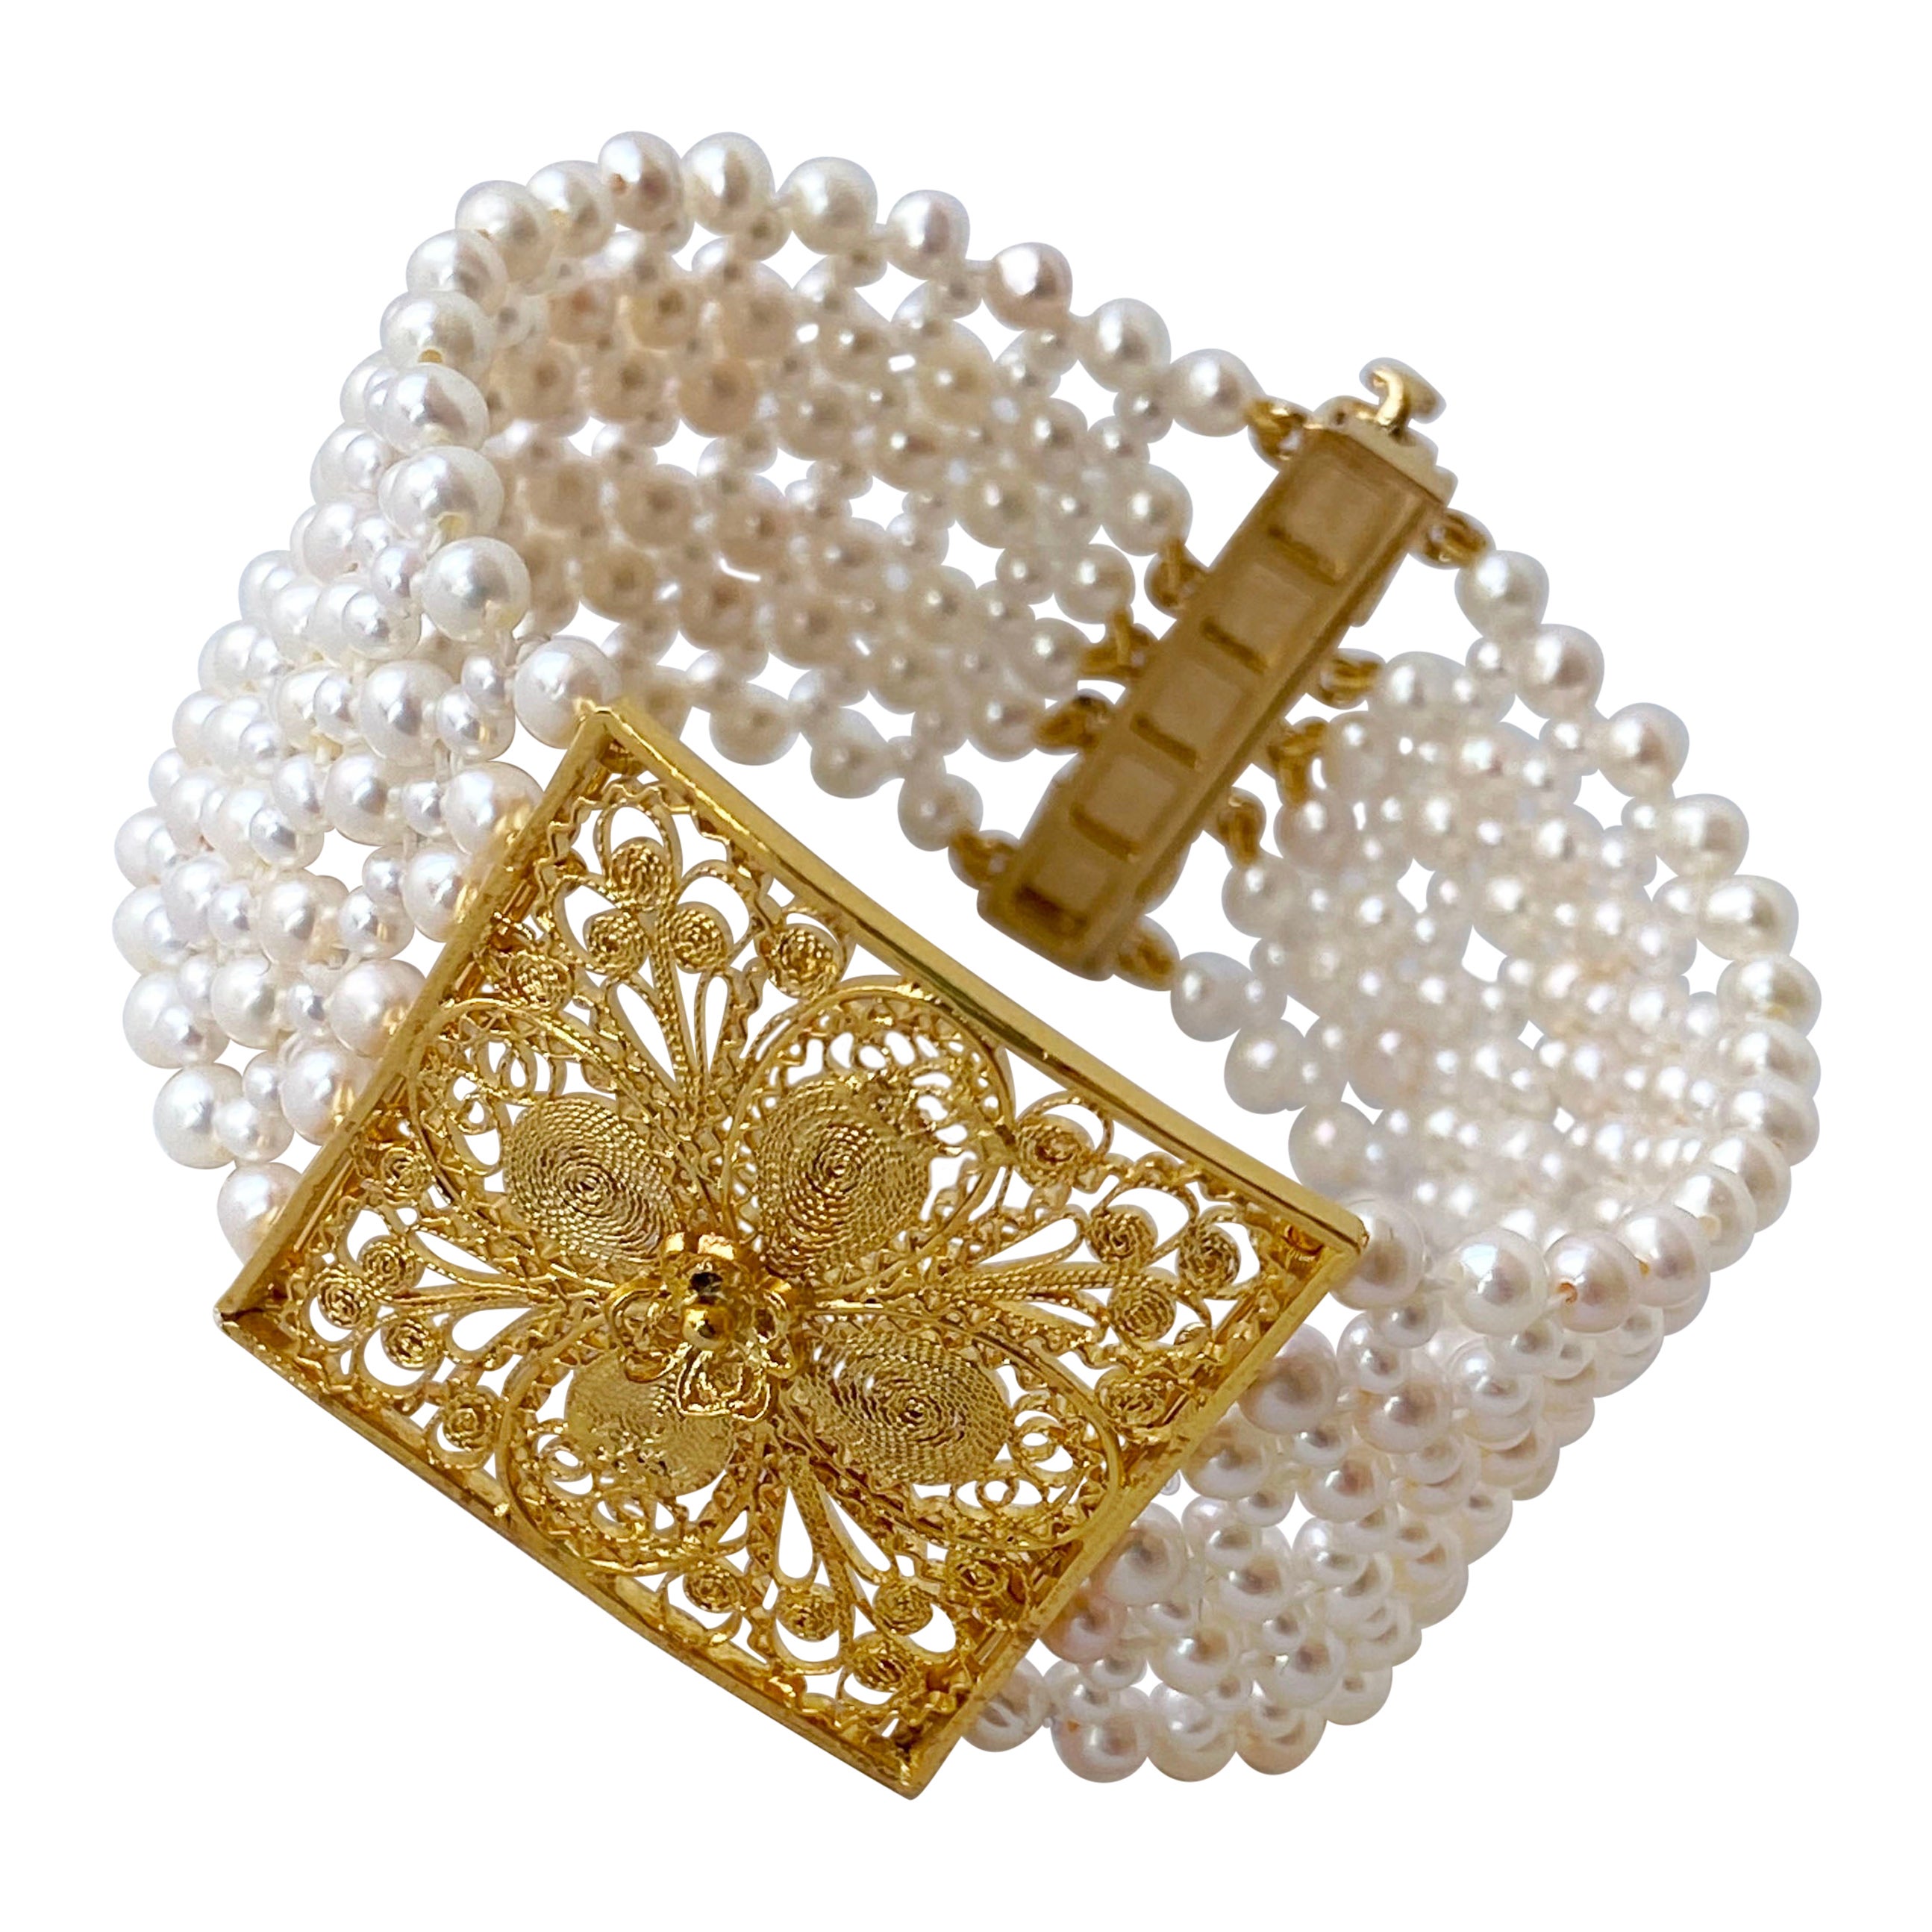 Marina J. Woven Pearl Bracelet with 18k Yellow Gold Floral Centerpiece & Clasp